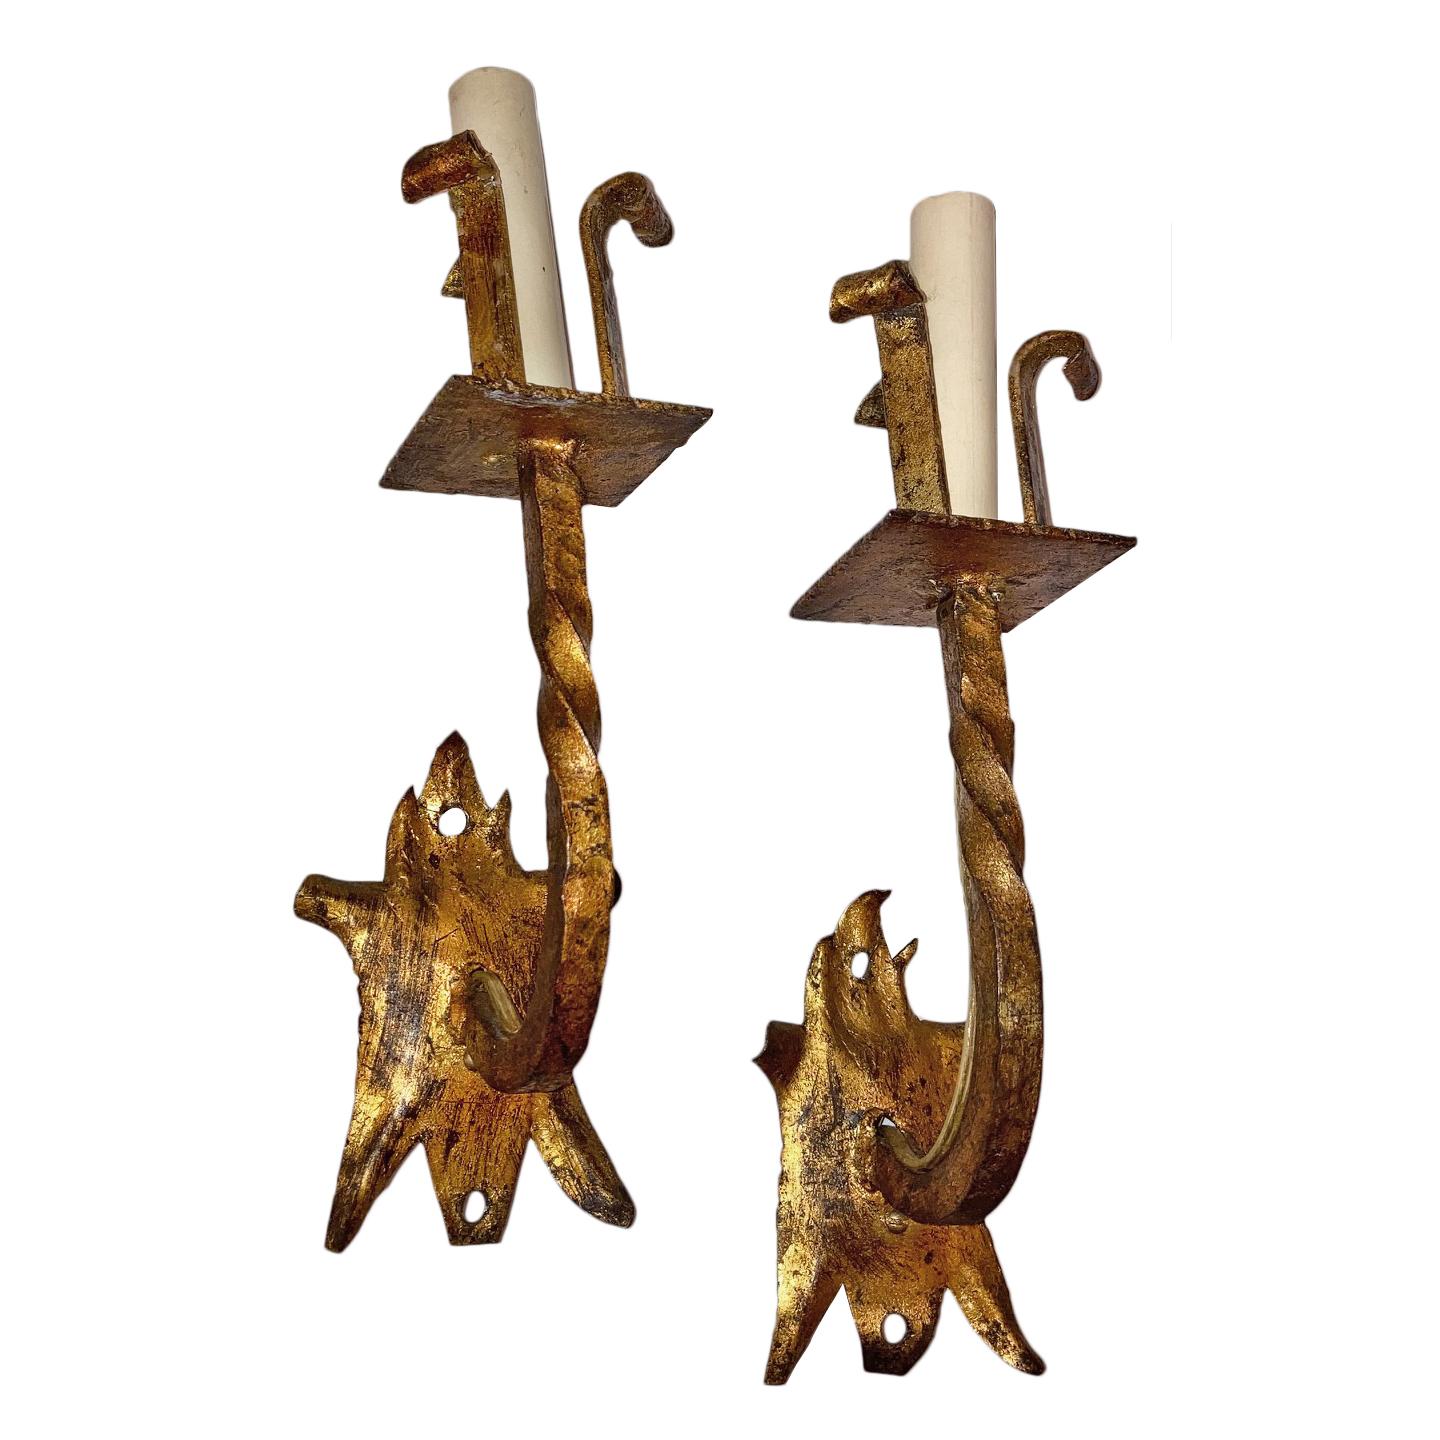 A set of circa 1940s Italian wrought and gilt iron single light sconces with original patina. Sold per pair

Measurements:
Height 12